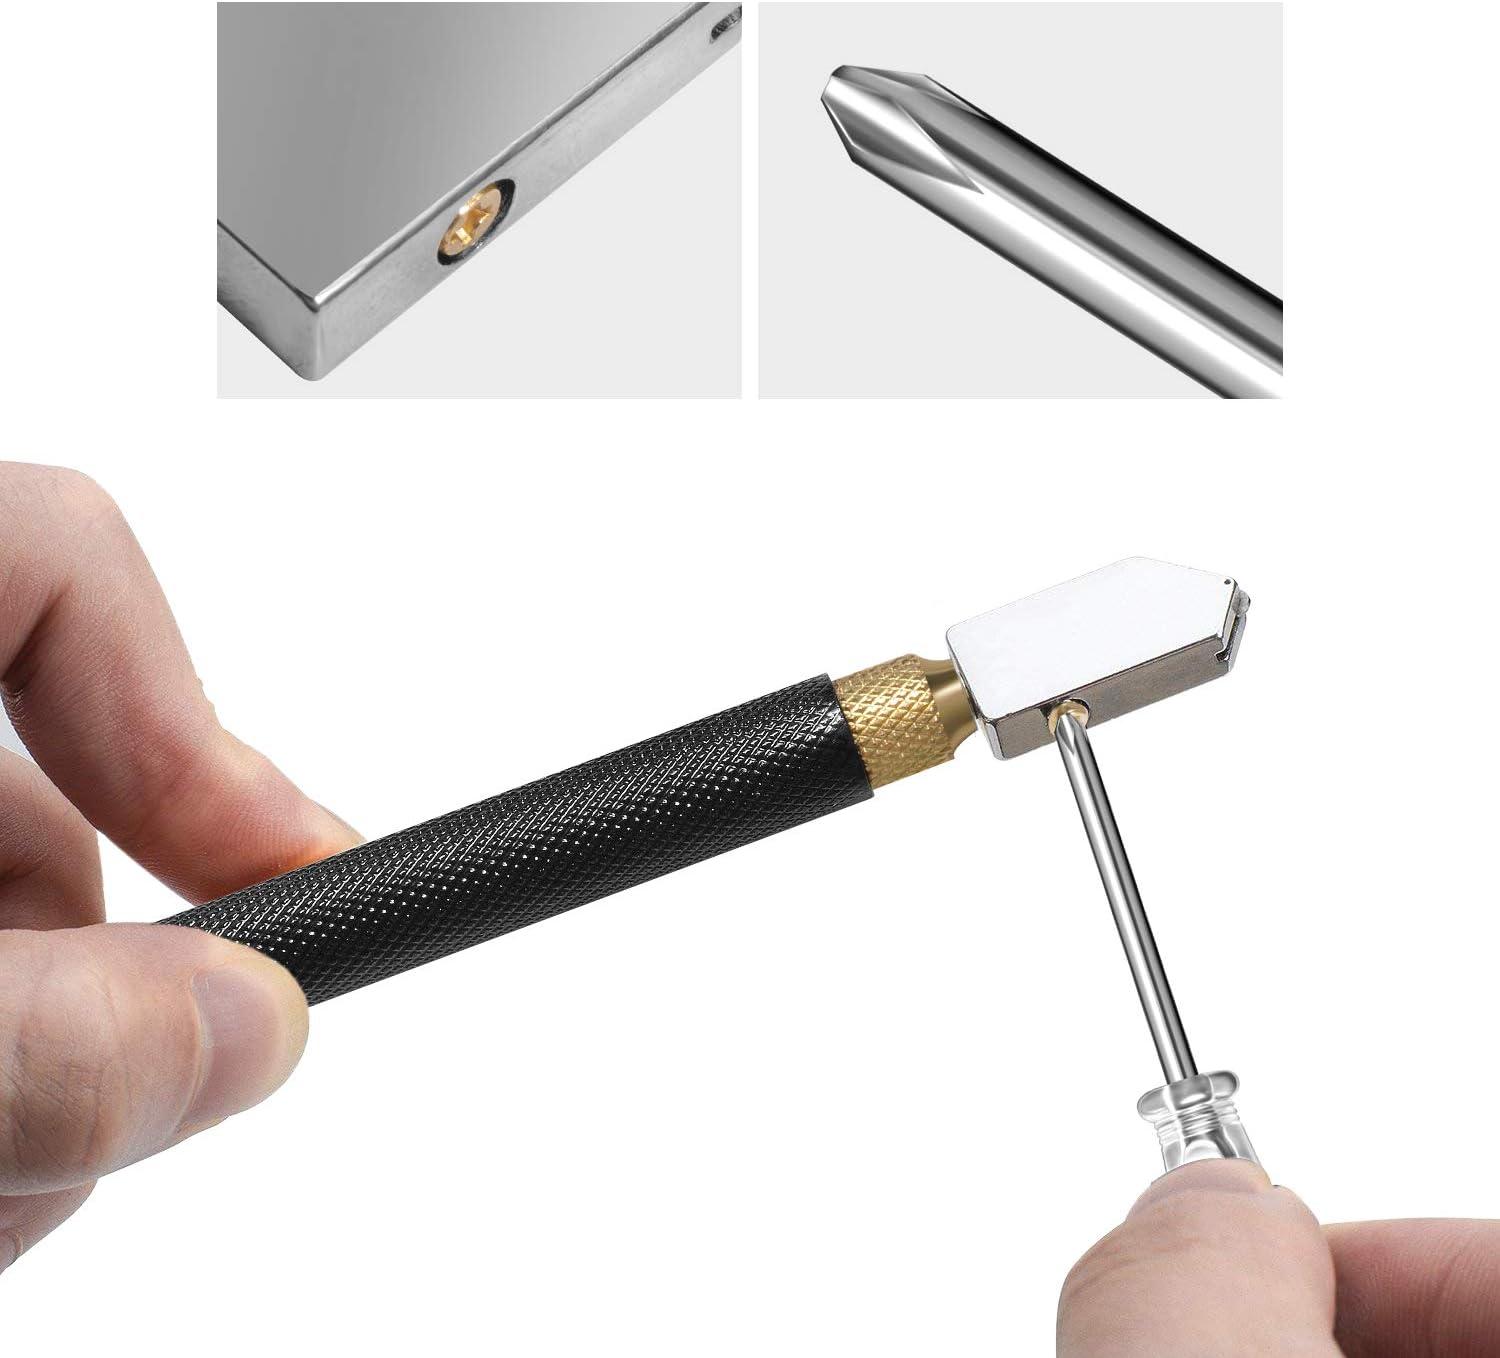 Glass Cutter 2mm-15mm,upgrade Glass Cutter Tool,pencil Style Oil